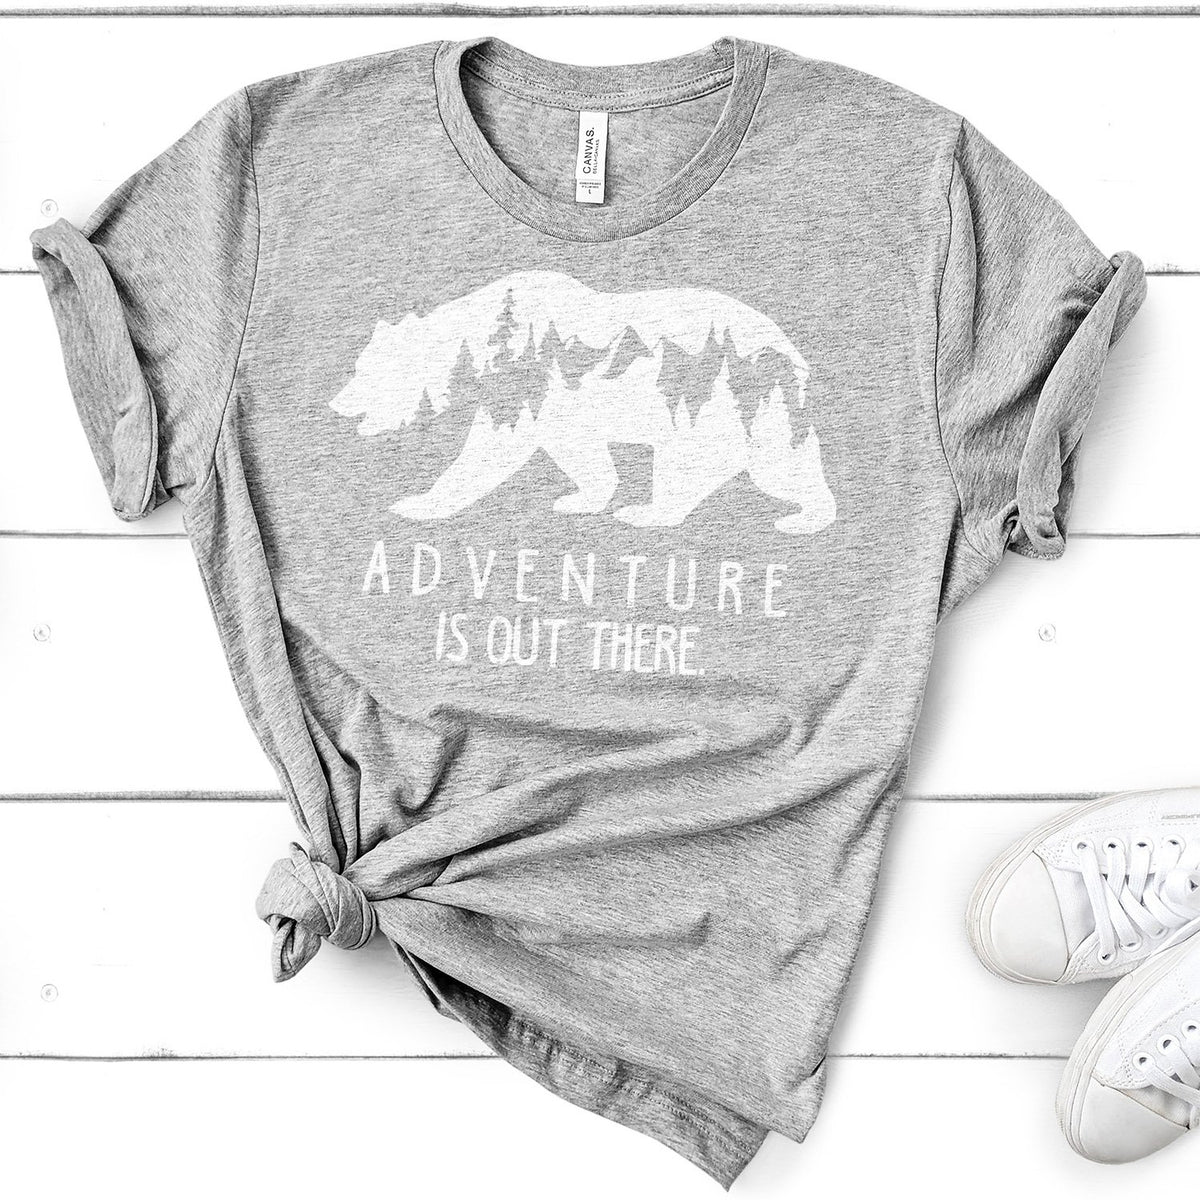 Adventure is Out There - Short Sleeve Tee Shirt